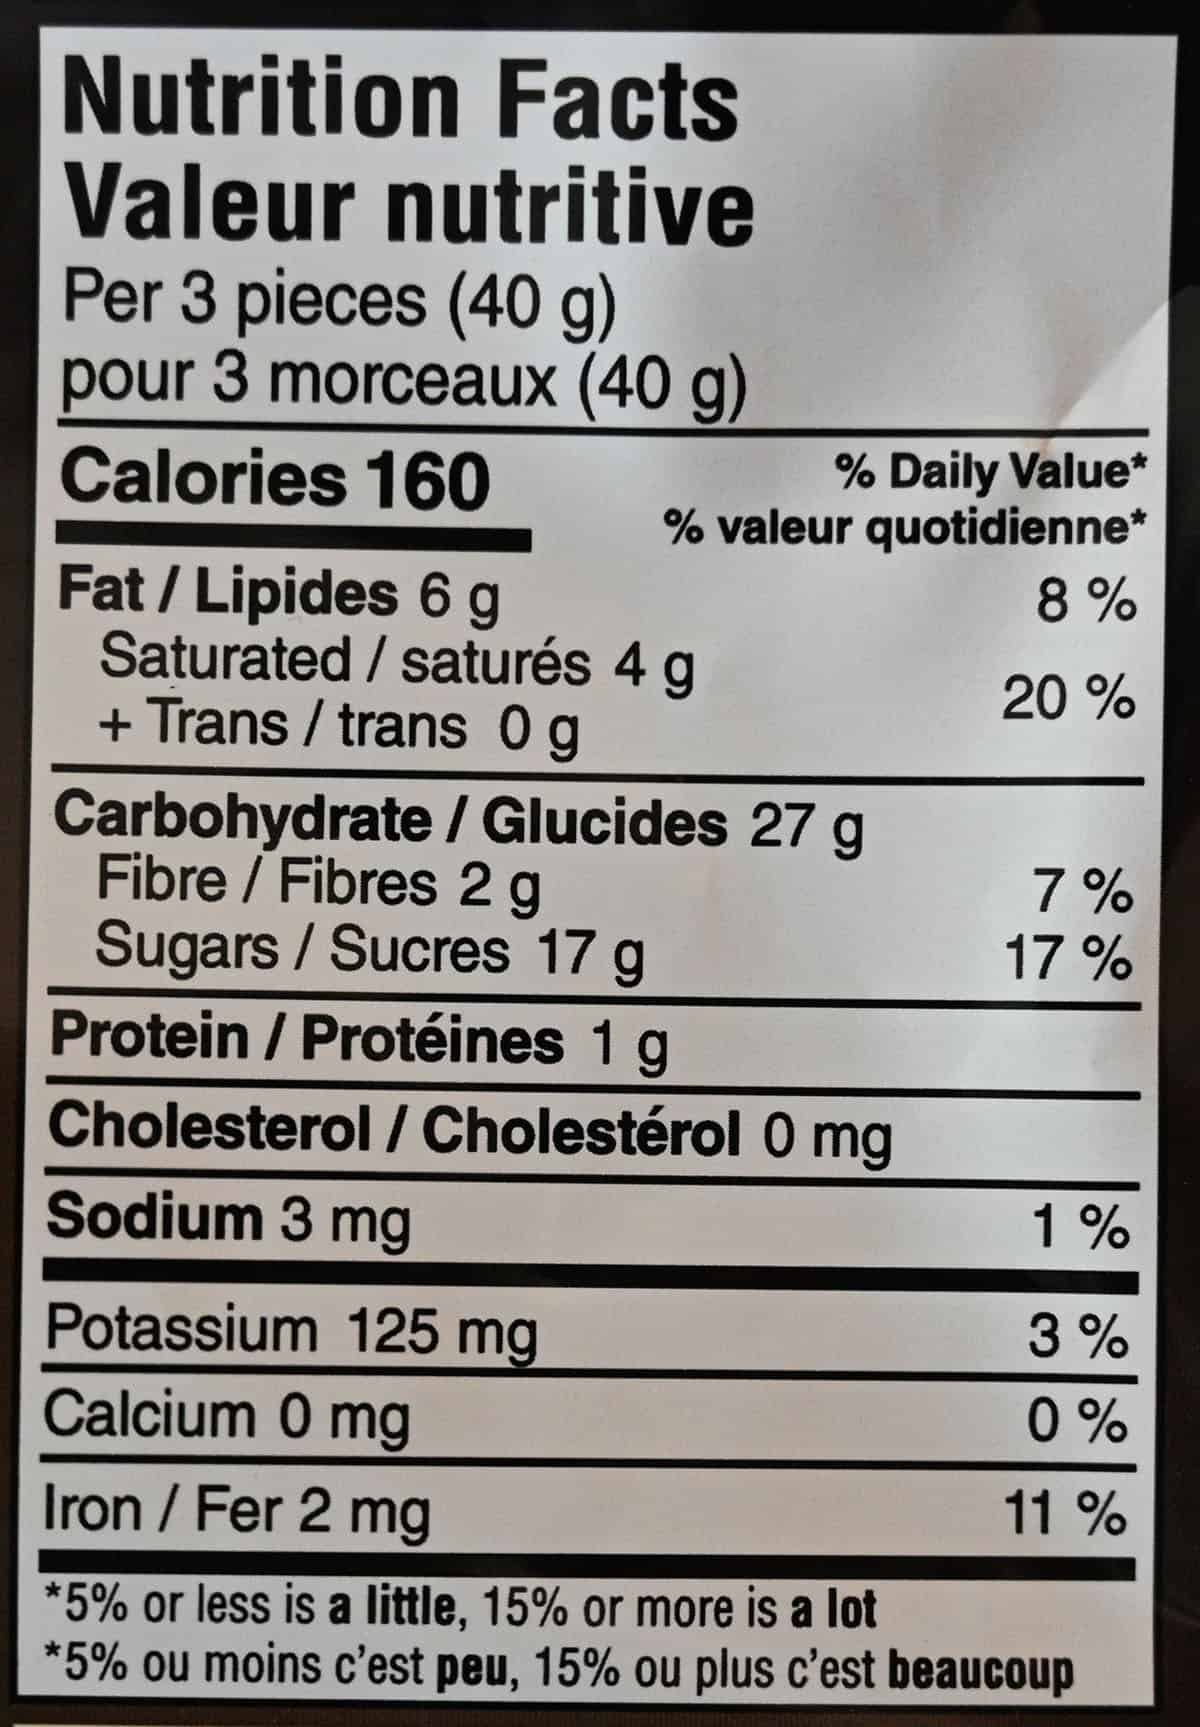 Kirkland Signature Dark Chocolate Mangoes Nutrition Facts from bag. 